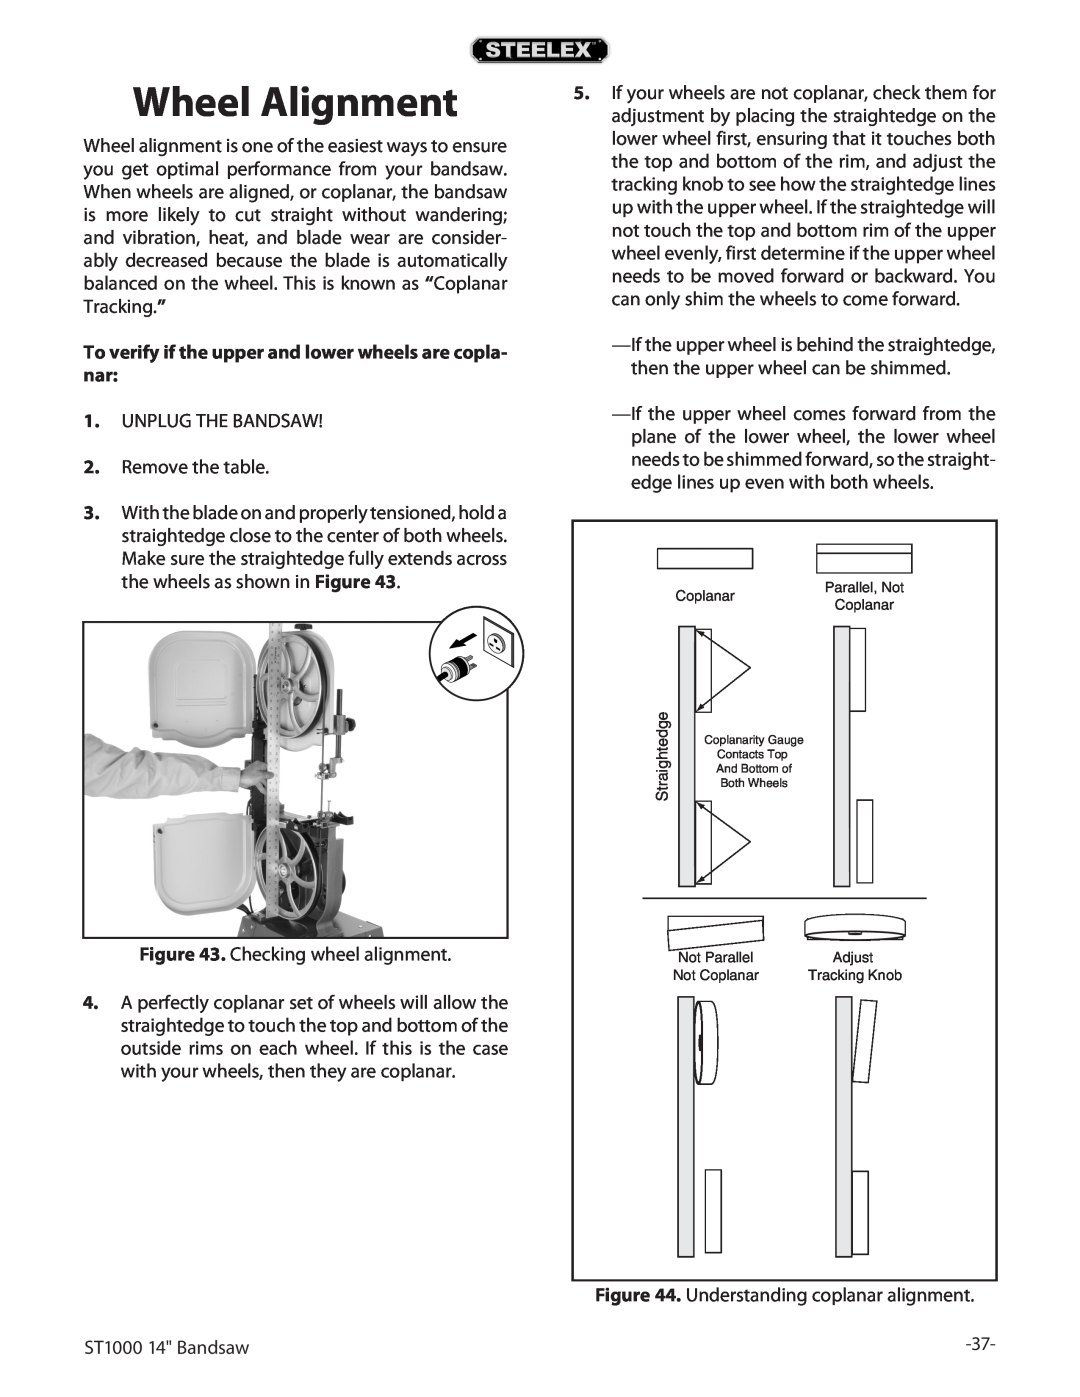 Woodstock ST1000 owner manual Wheel Alignment, To verify if the upper and lower wheels are copla- nar 